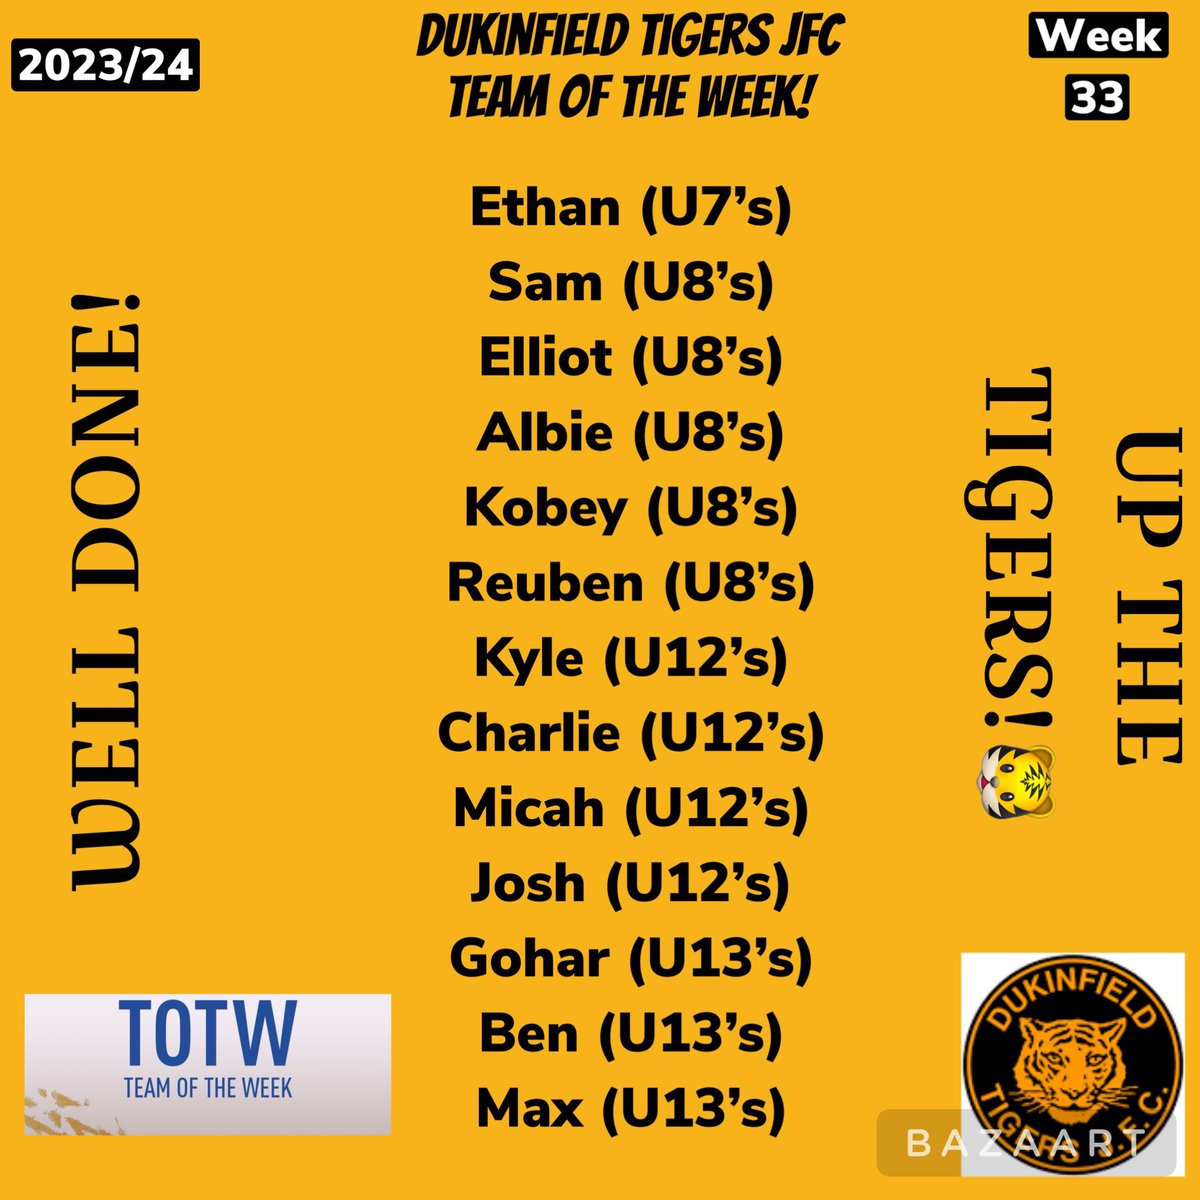 Well Done to everyone who’s made the Tigers Team of the Week! 👏🏼🐯⚽️